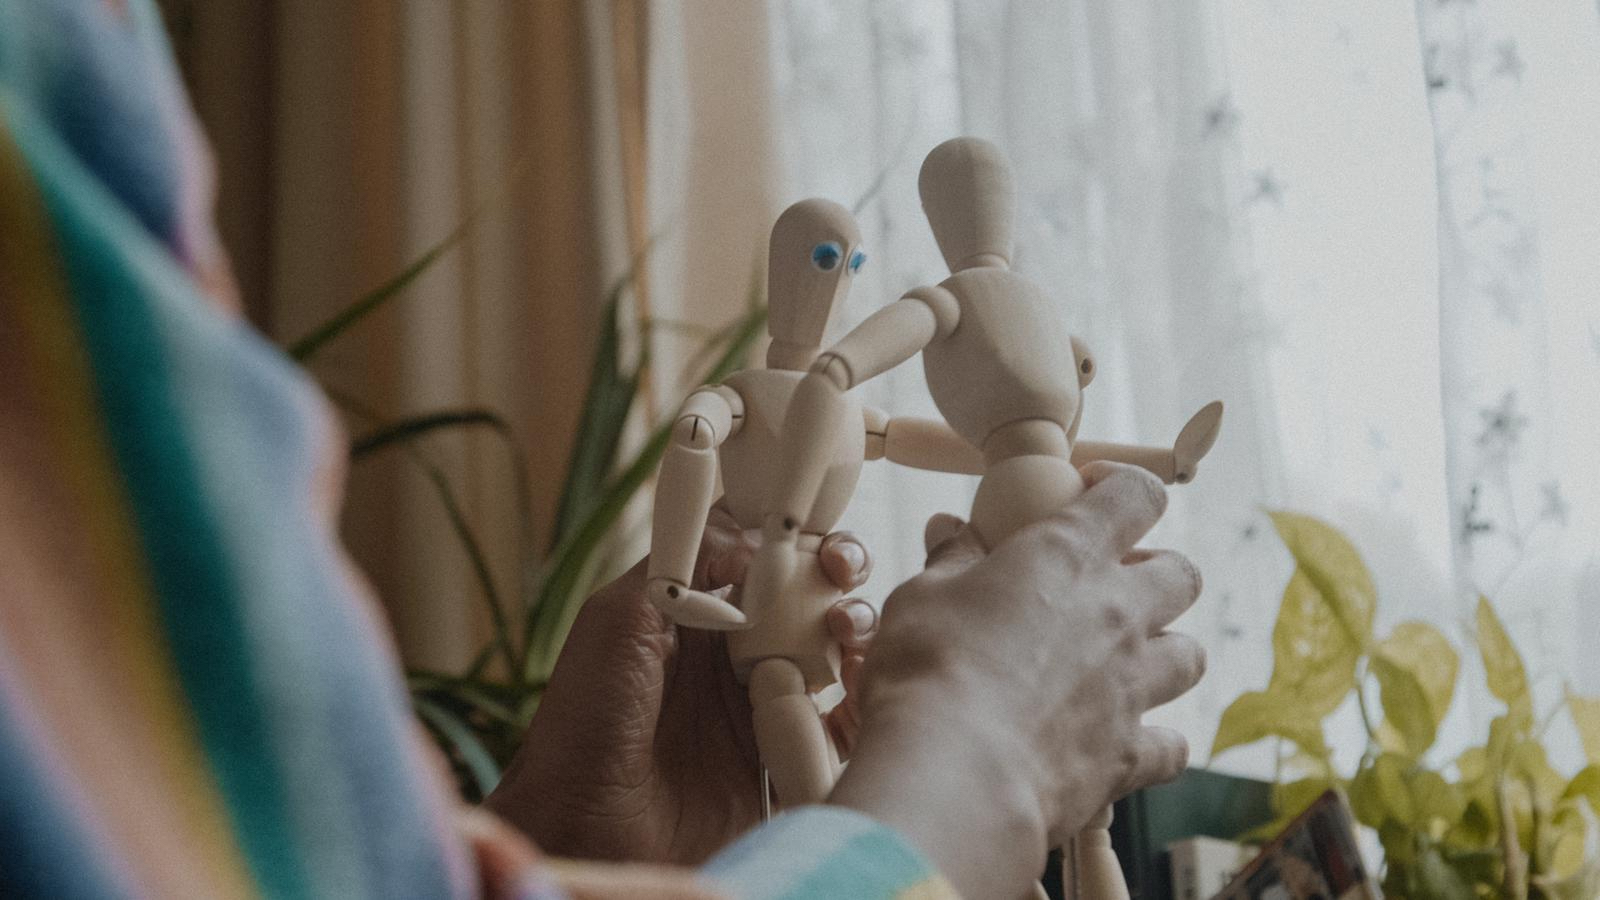 A hand holding two small mannequins